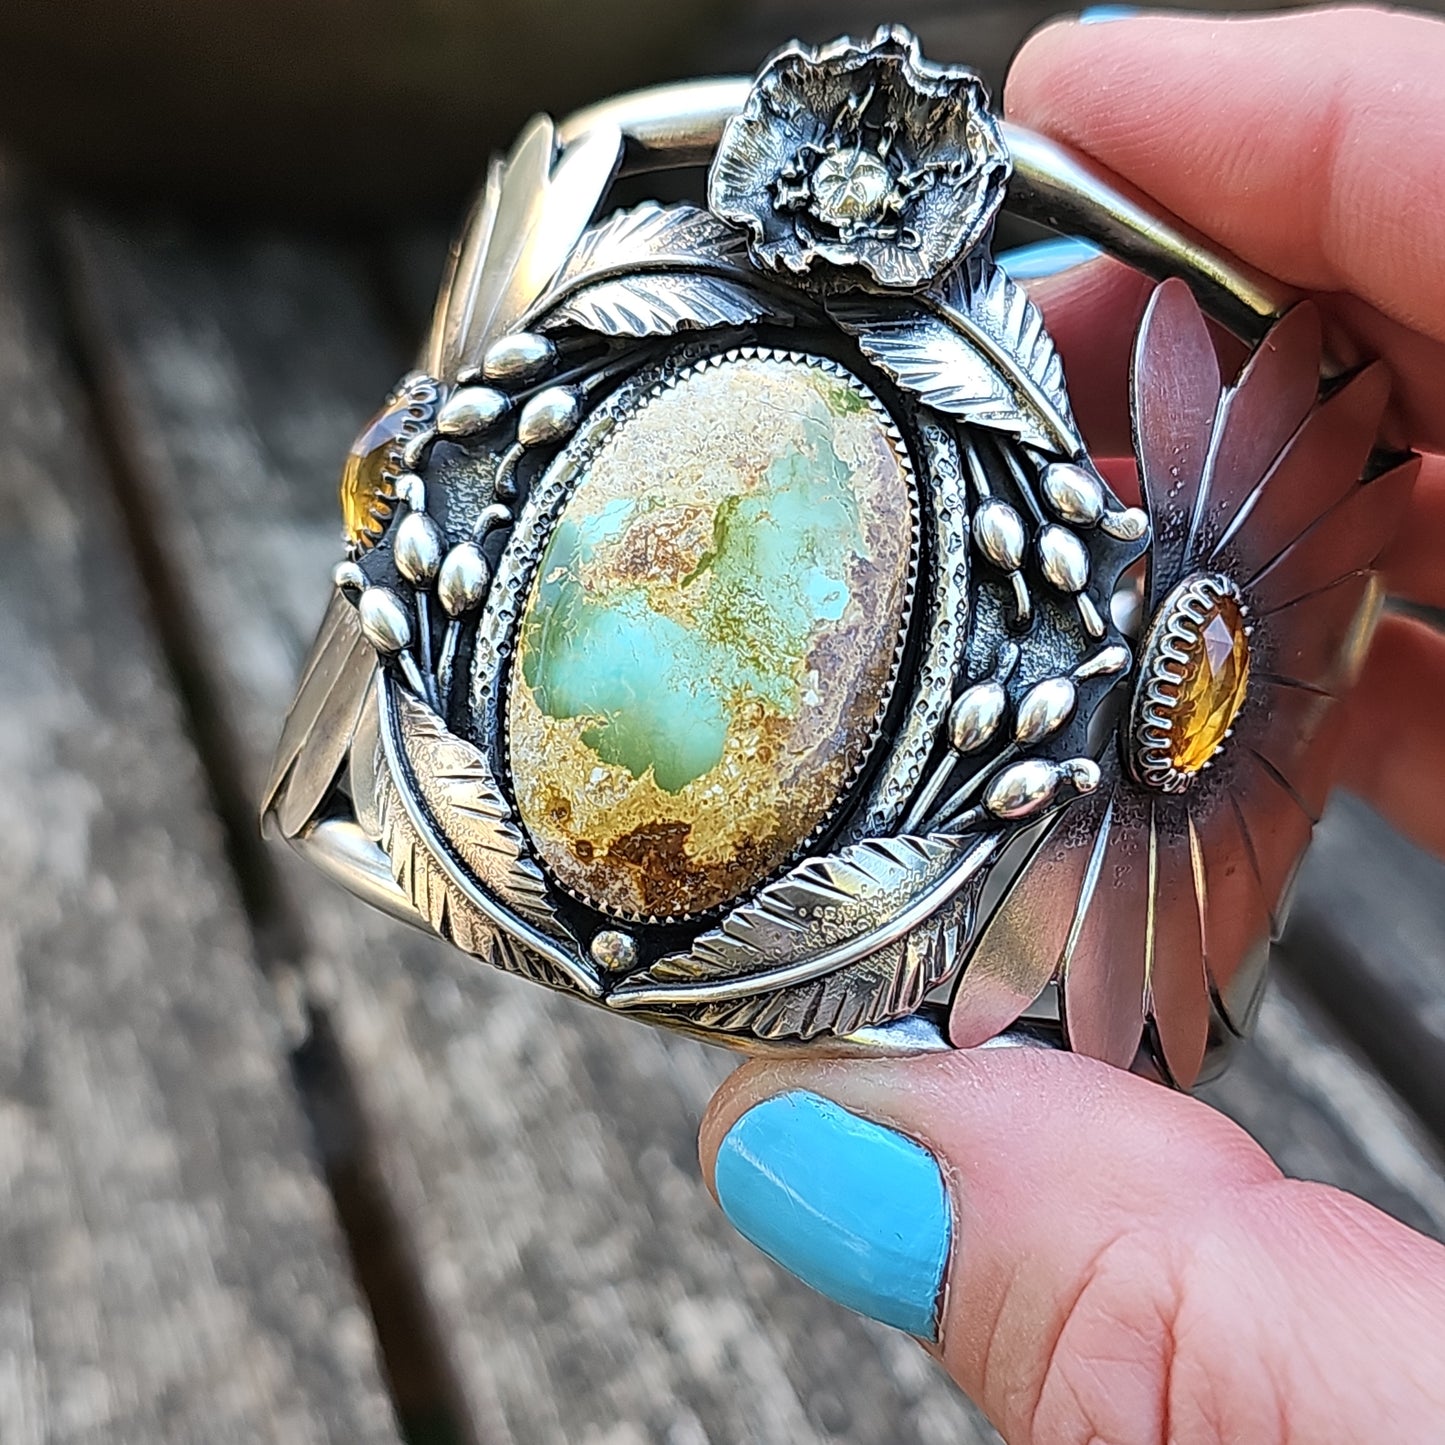 x WILD FLOWER WOMAN Statement Cuff Bracelet - Stone Mountain Ribbon Turquoise and Citrine in All Sterling Silver size M/L